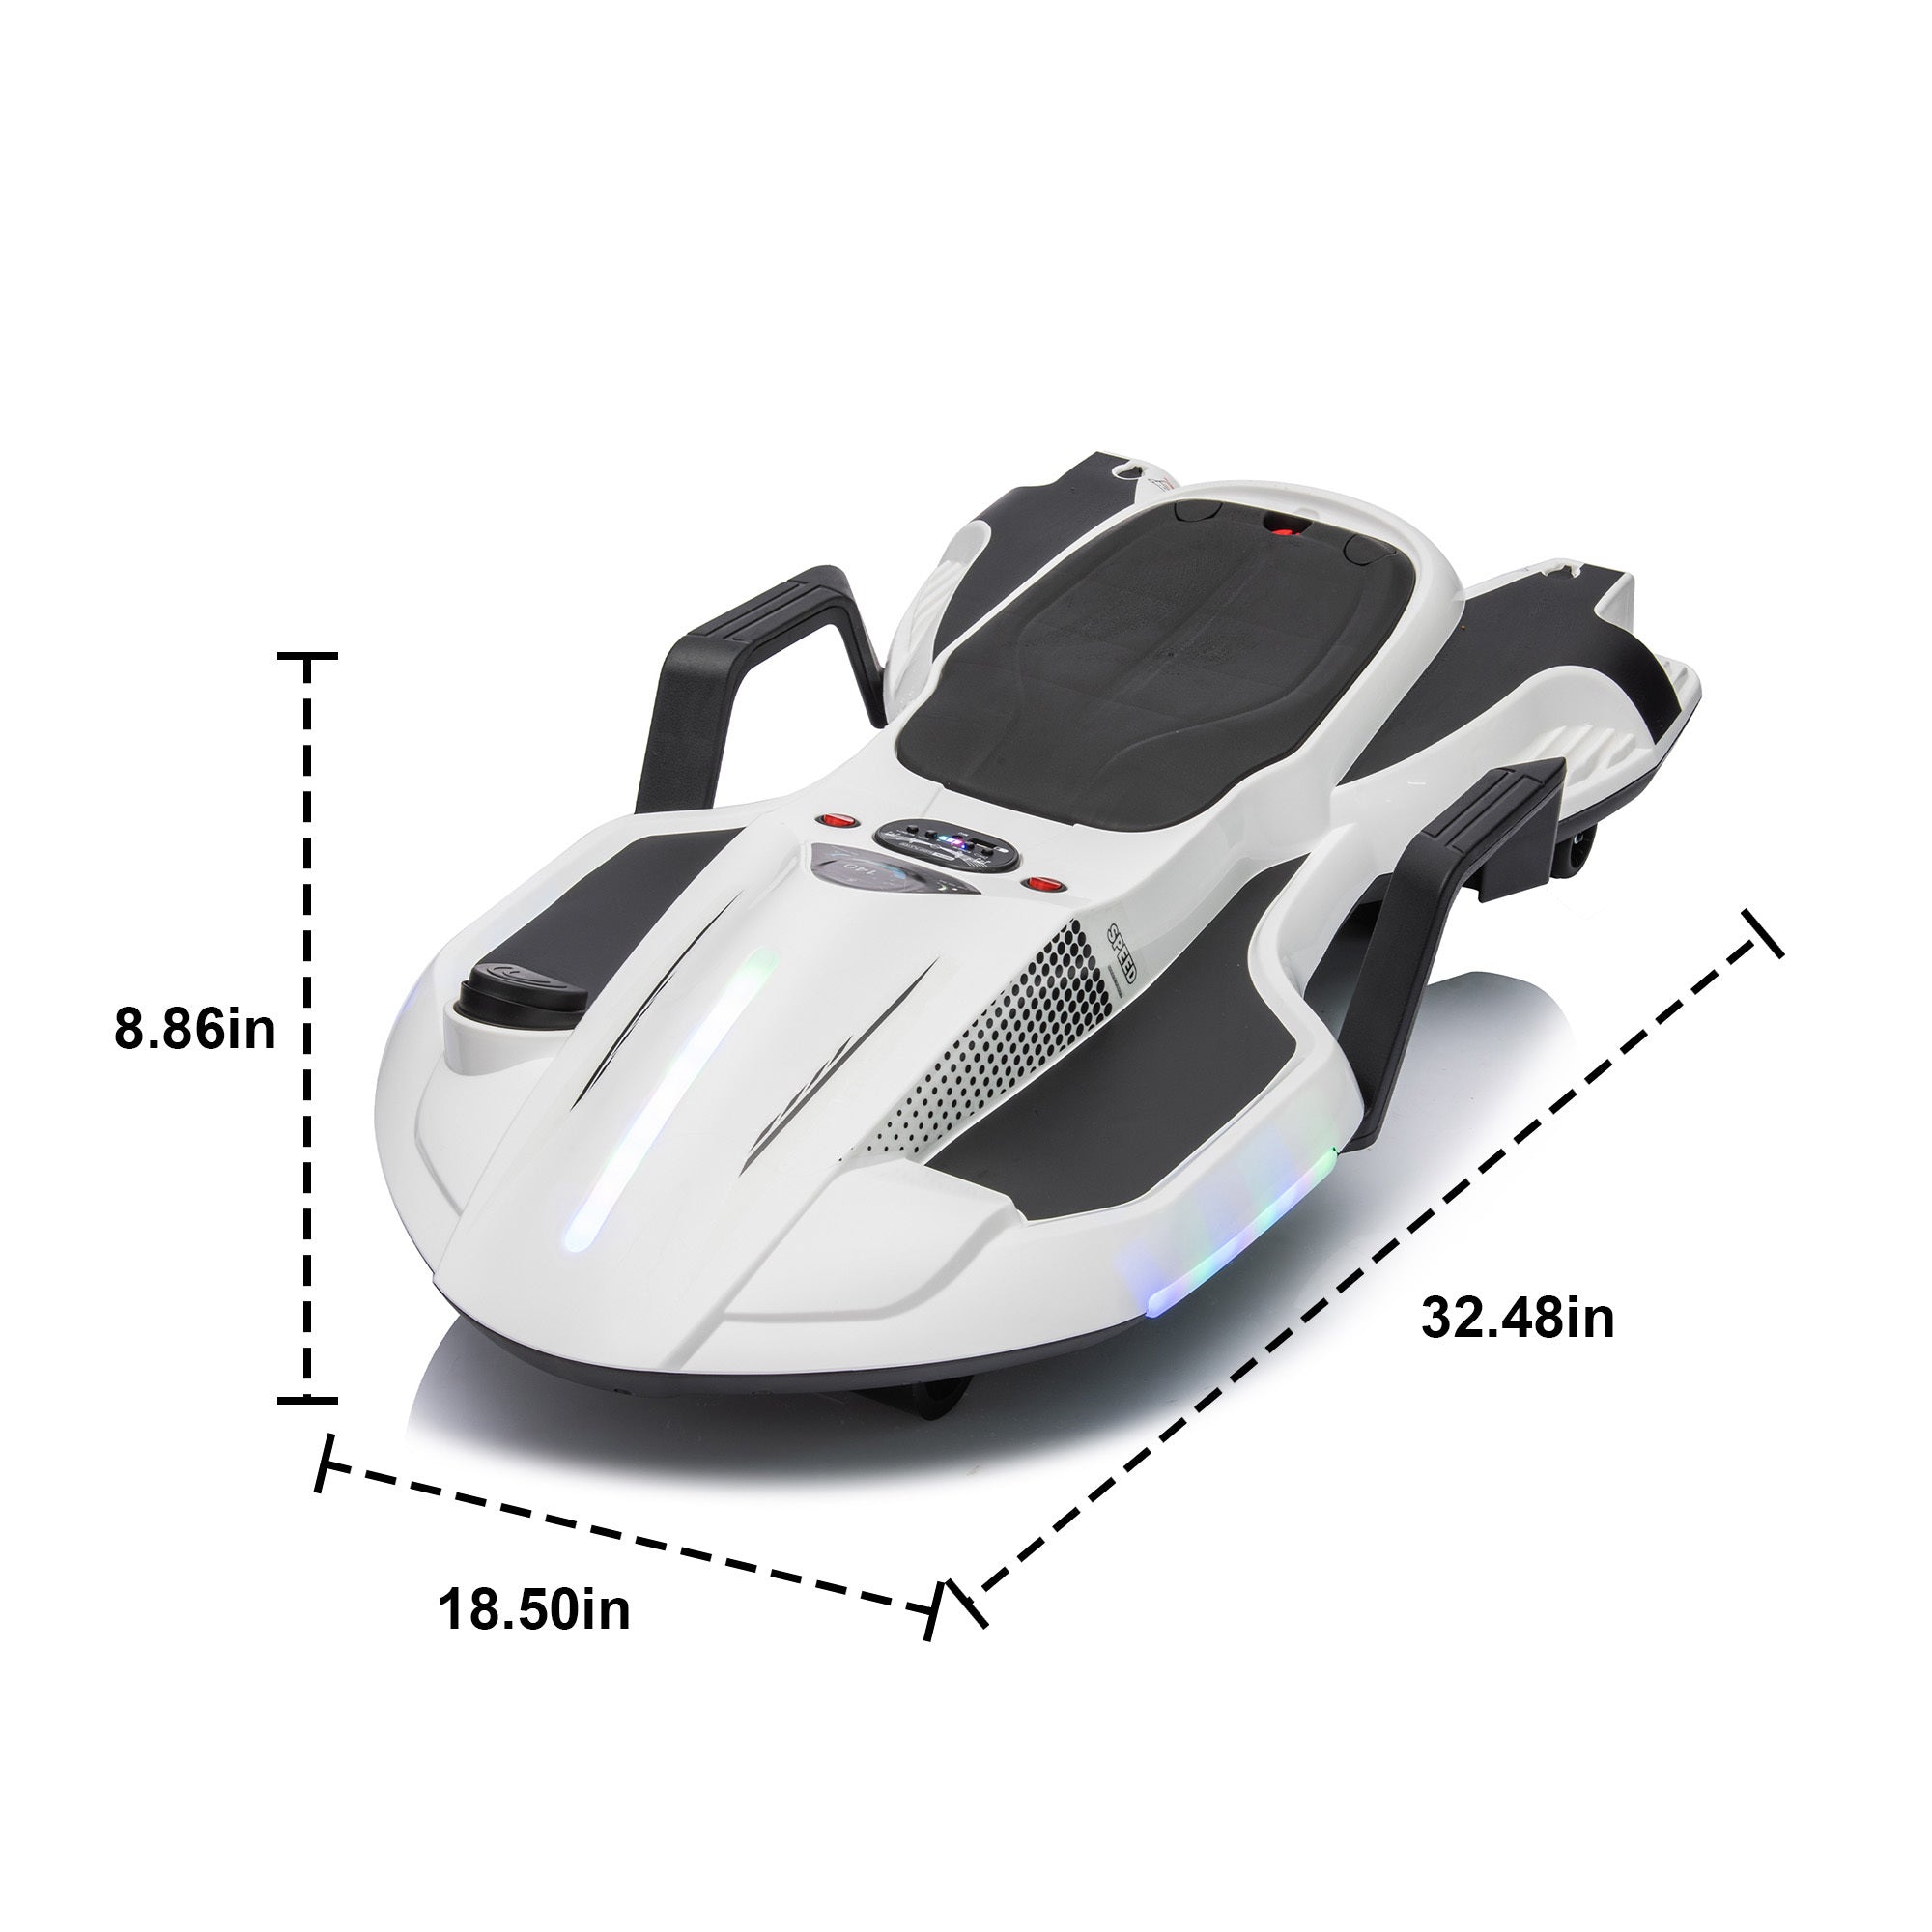 🆓🚛 24V Kids Ride On Electric Scooter W/ Helmet Knee Pads, Spray Function, 200W Motor, 5.59-6.84MPH, Gravity Steering, Bluetooth, Use for 1-2 Hours, Age 6+, White